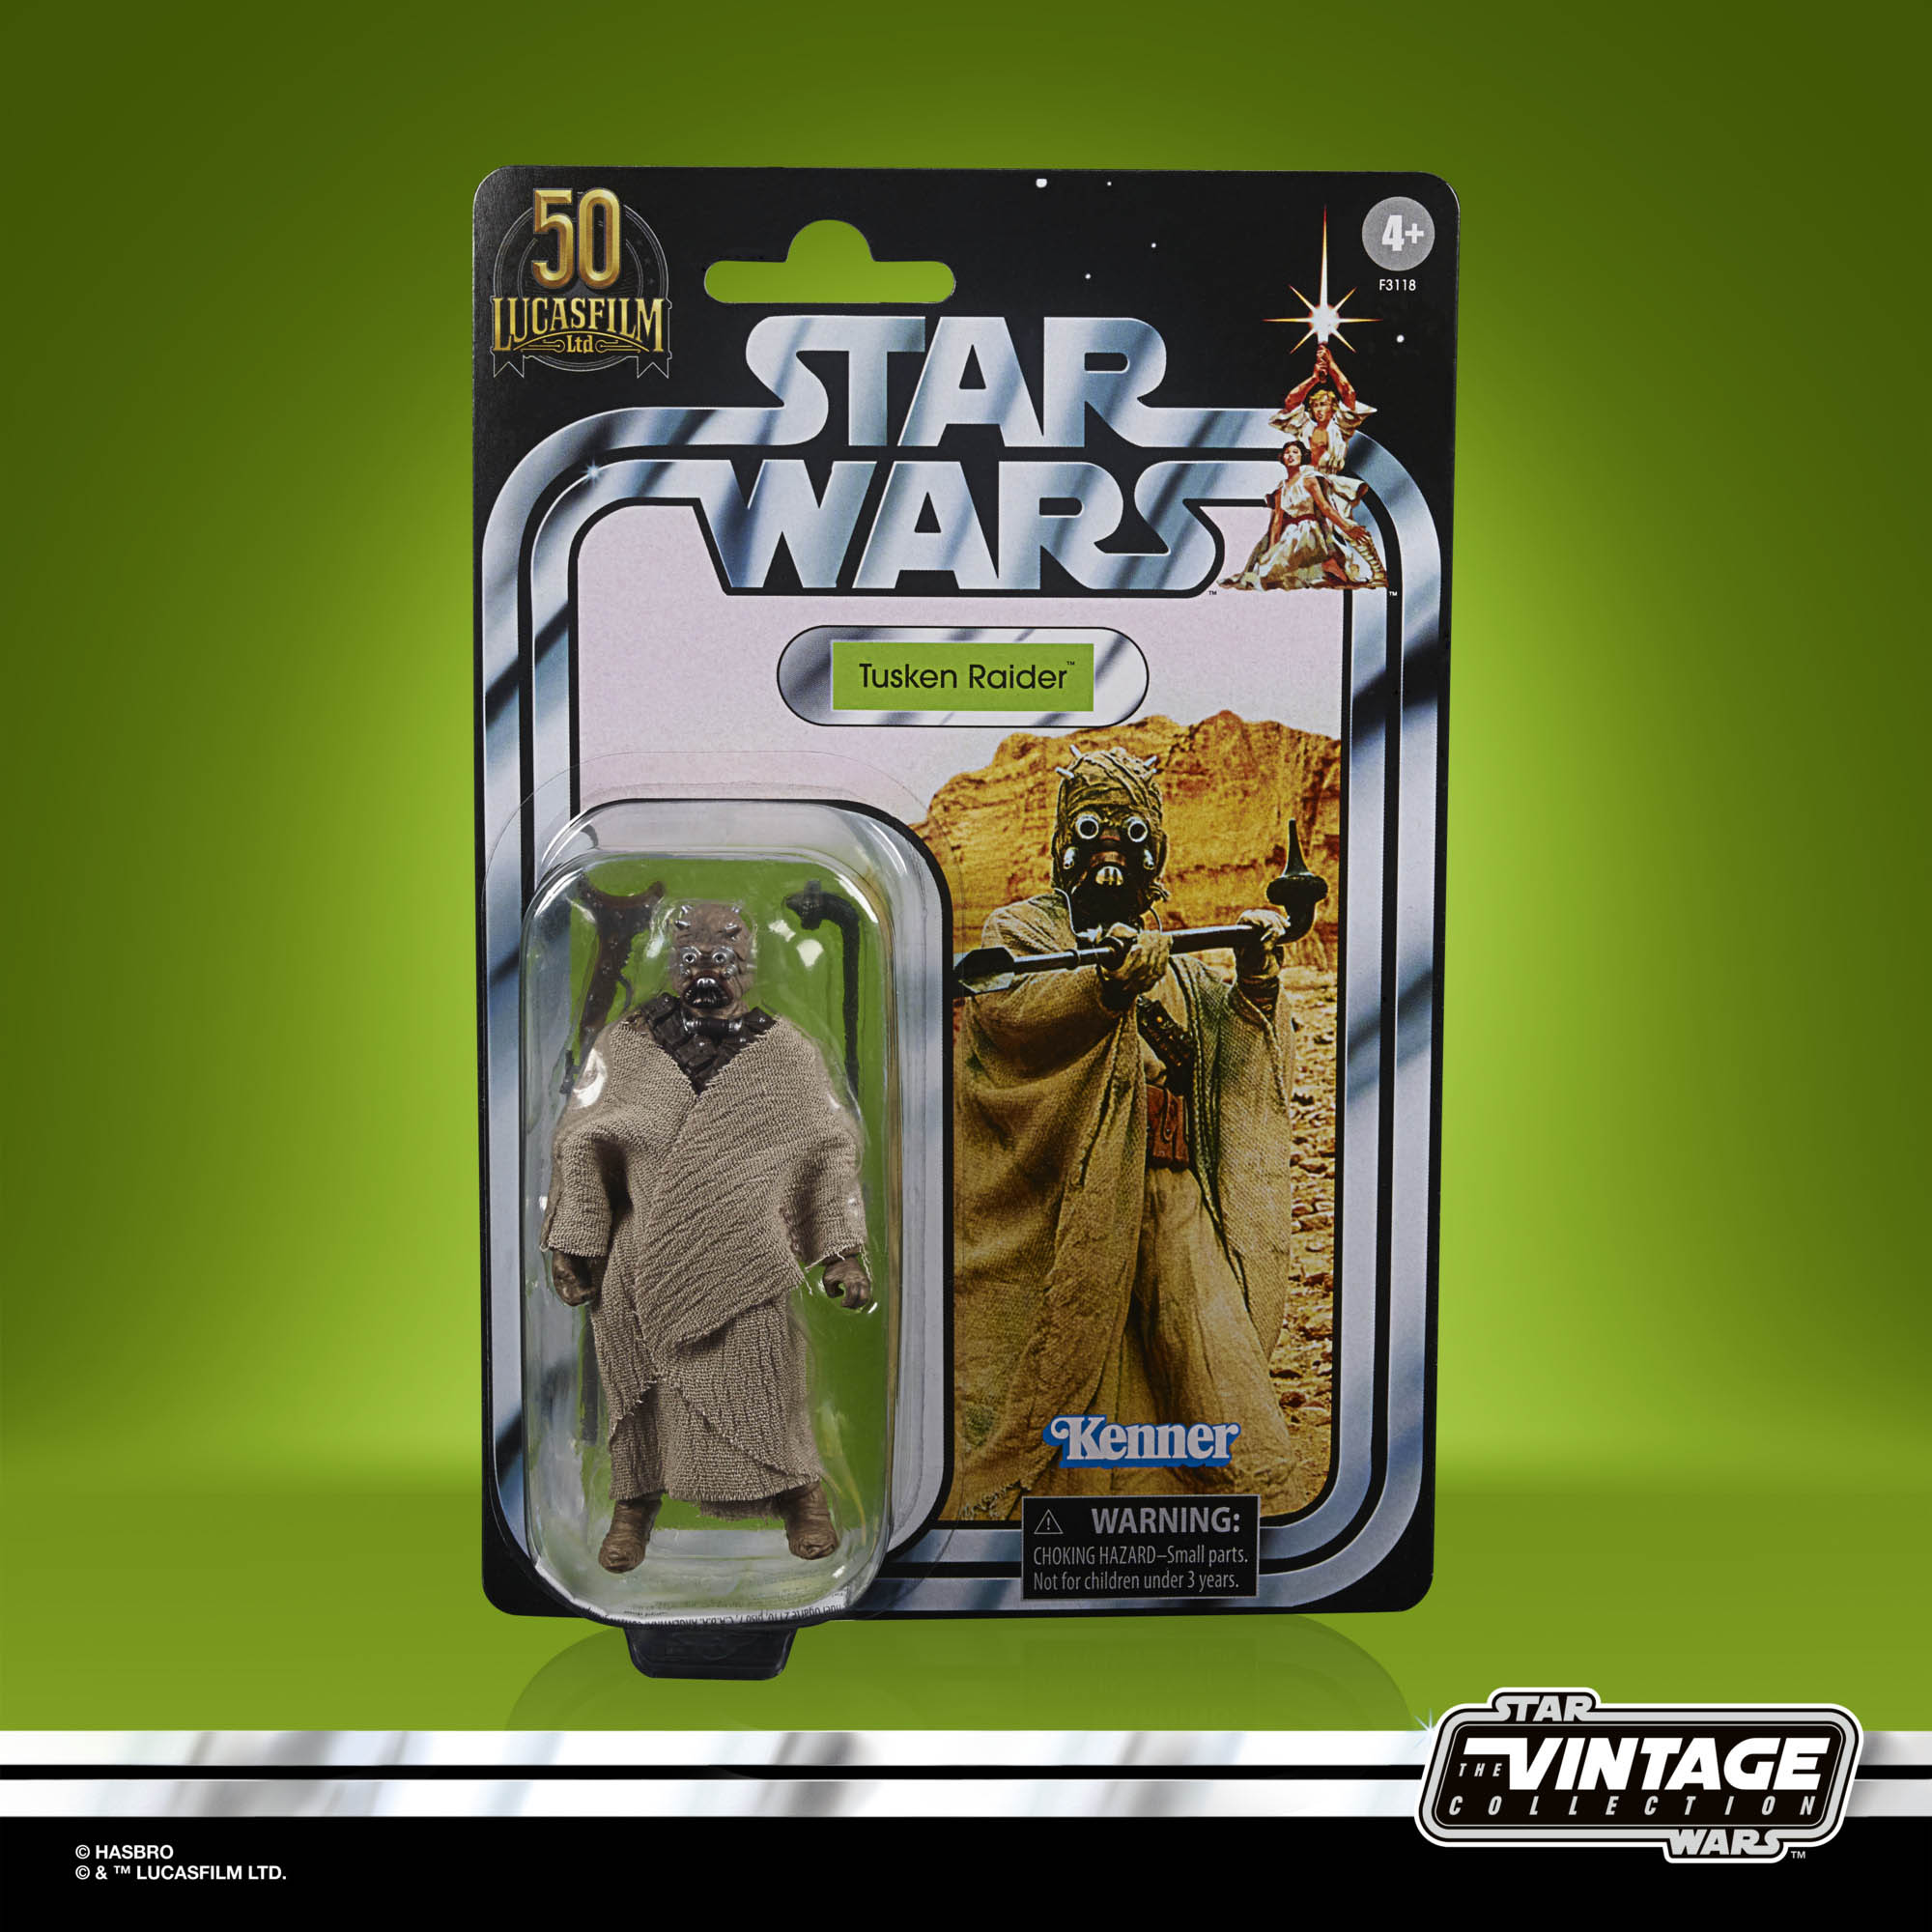 New Star Wars Black Series and Vintage Collection reveals from Hasbro